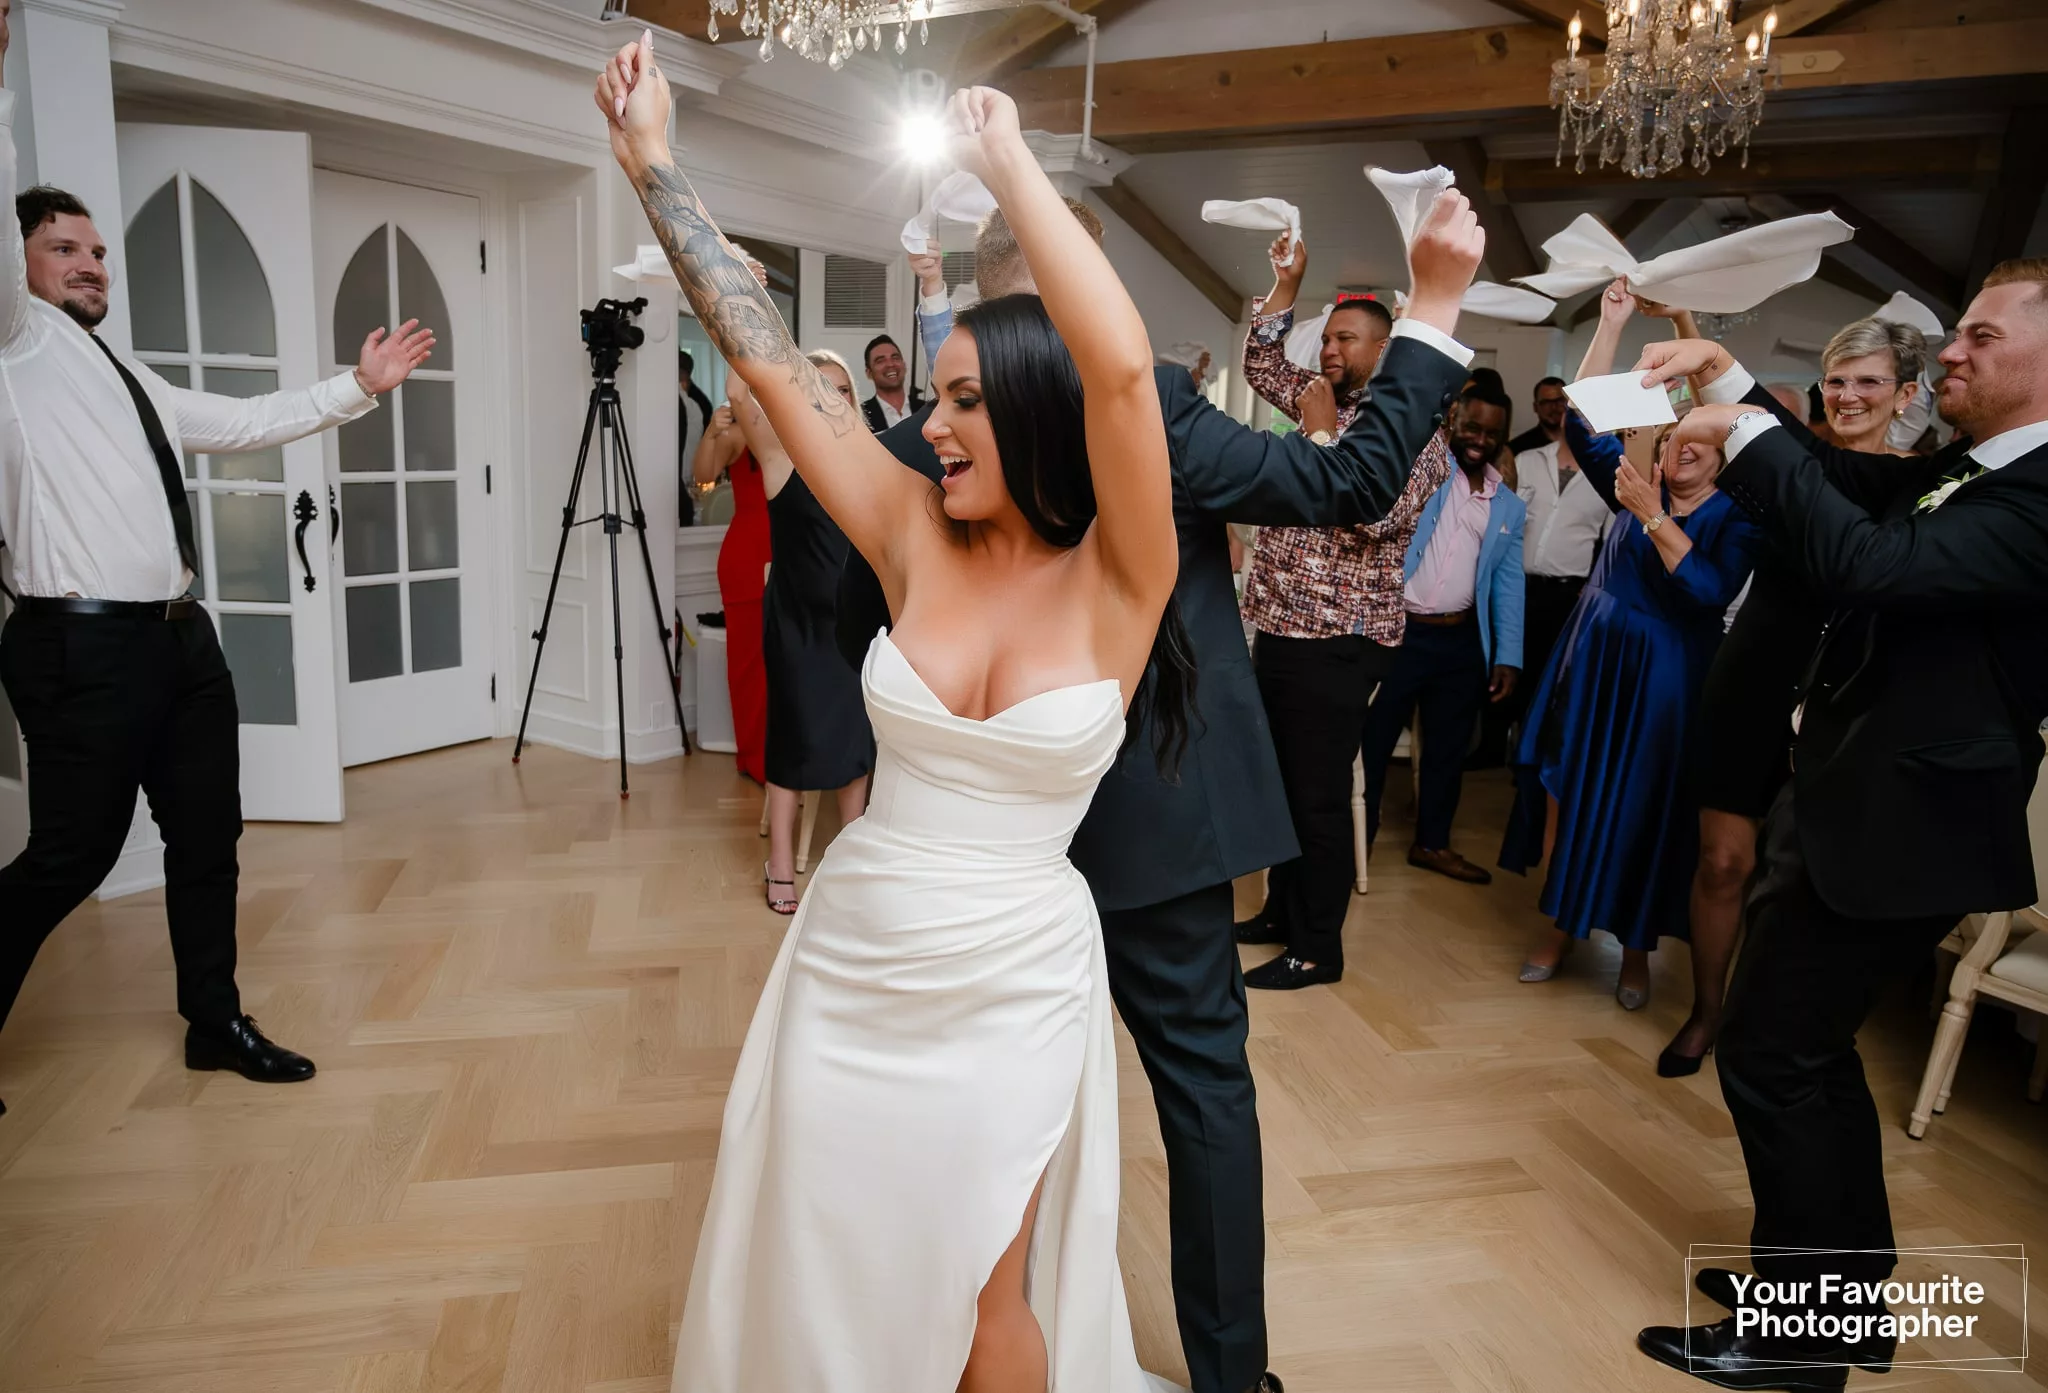 Bride dancing on the dance floor while people wave napkins around